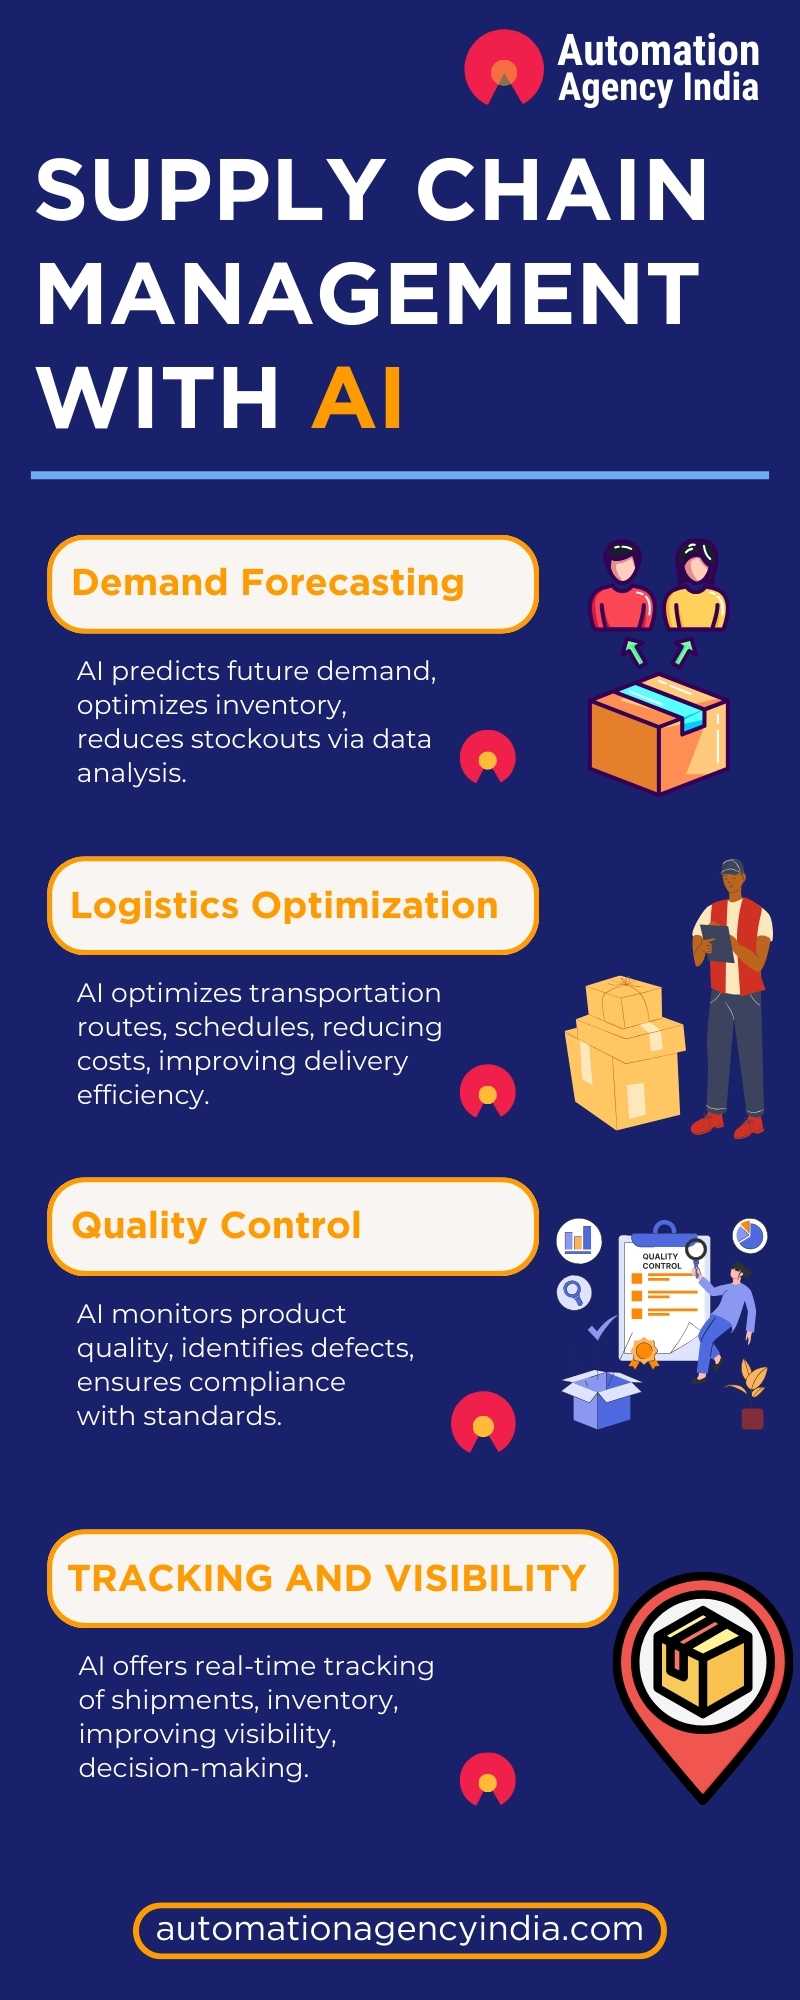 Infographic on Supply Chain Management with AI